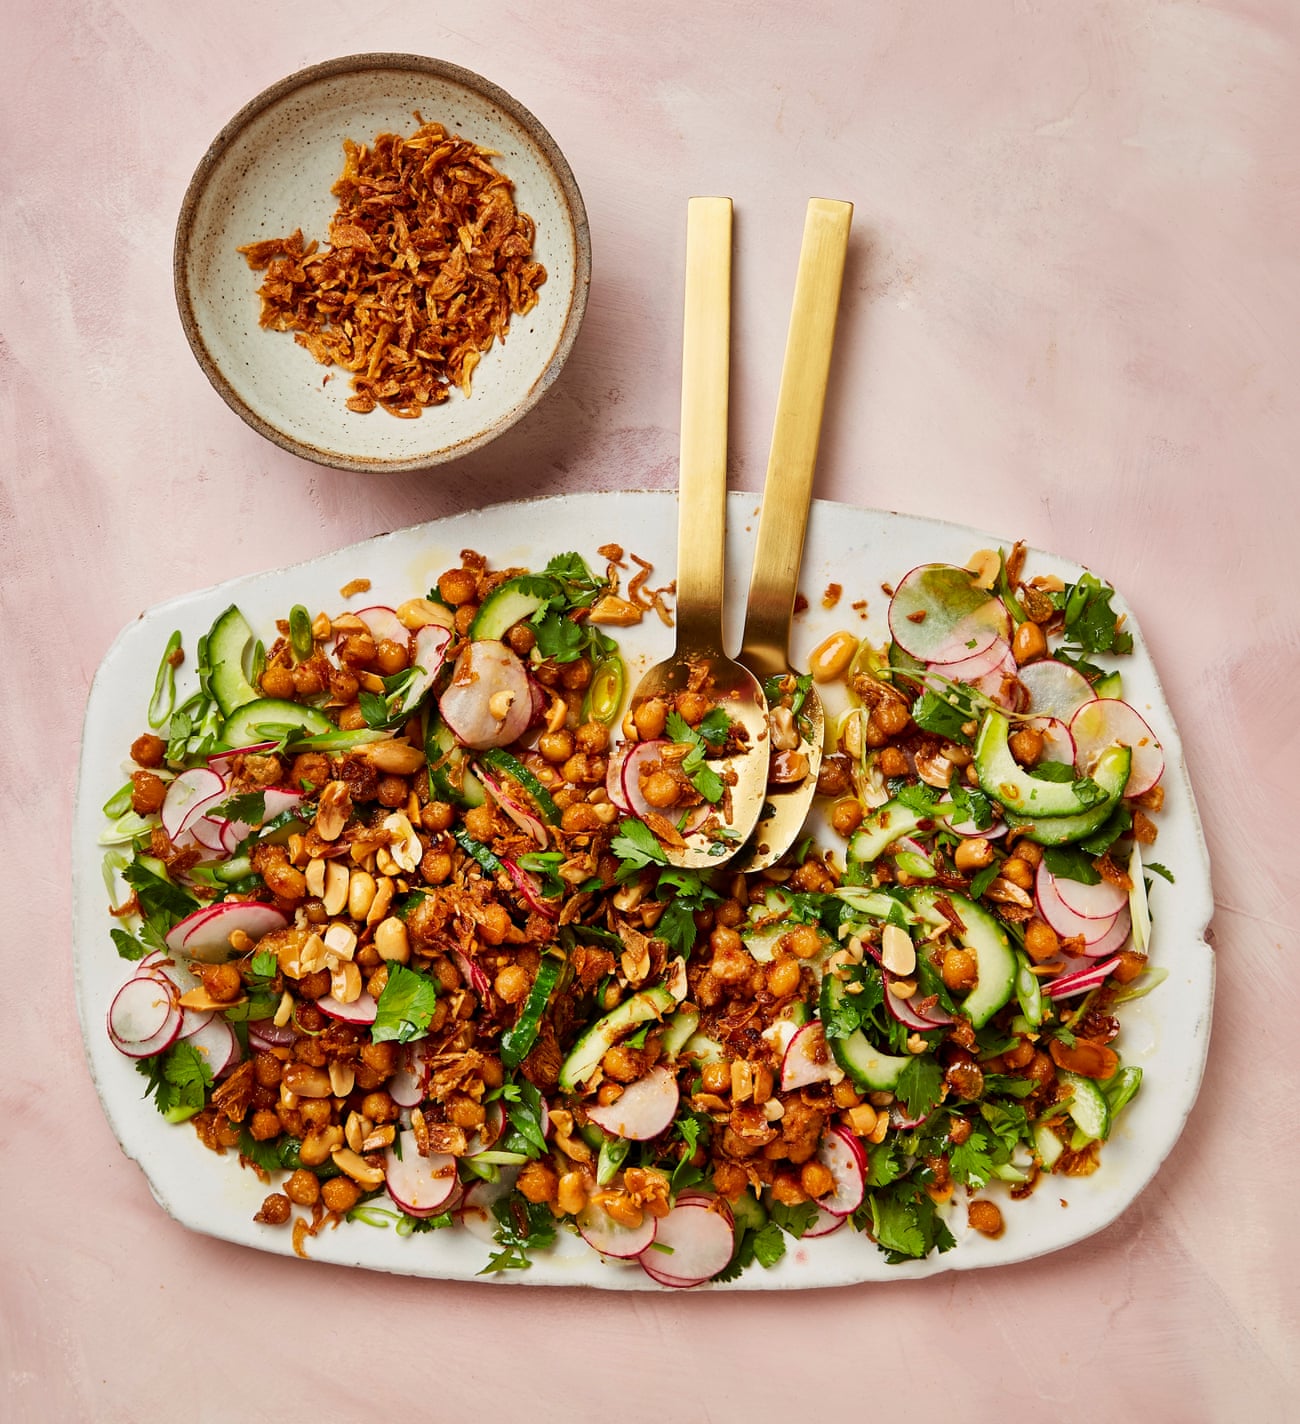 Yotam Ottolenghi’s miso and peanut butter chickpea salad.